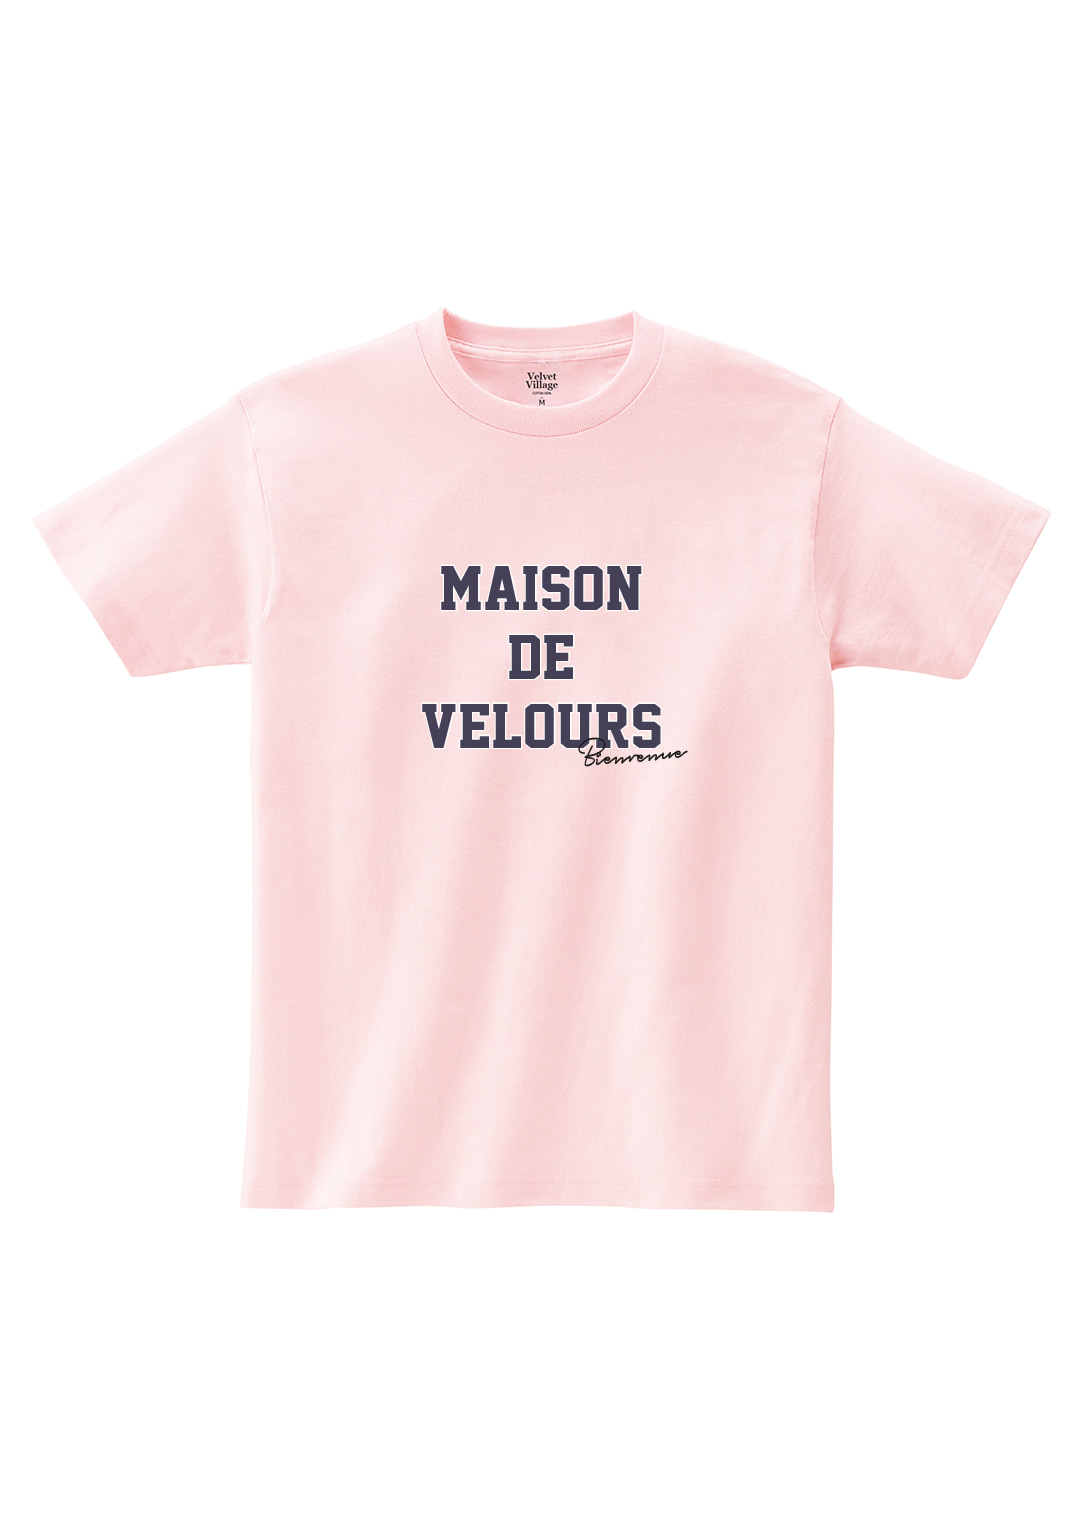 Maison Velours T-shirt (Baby Pink)